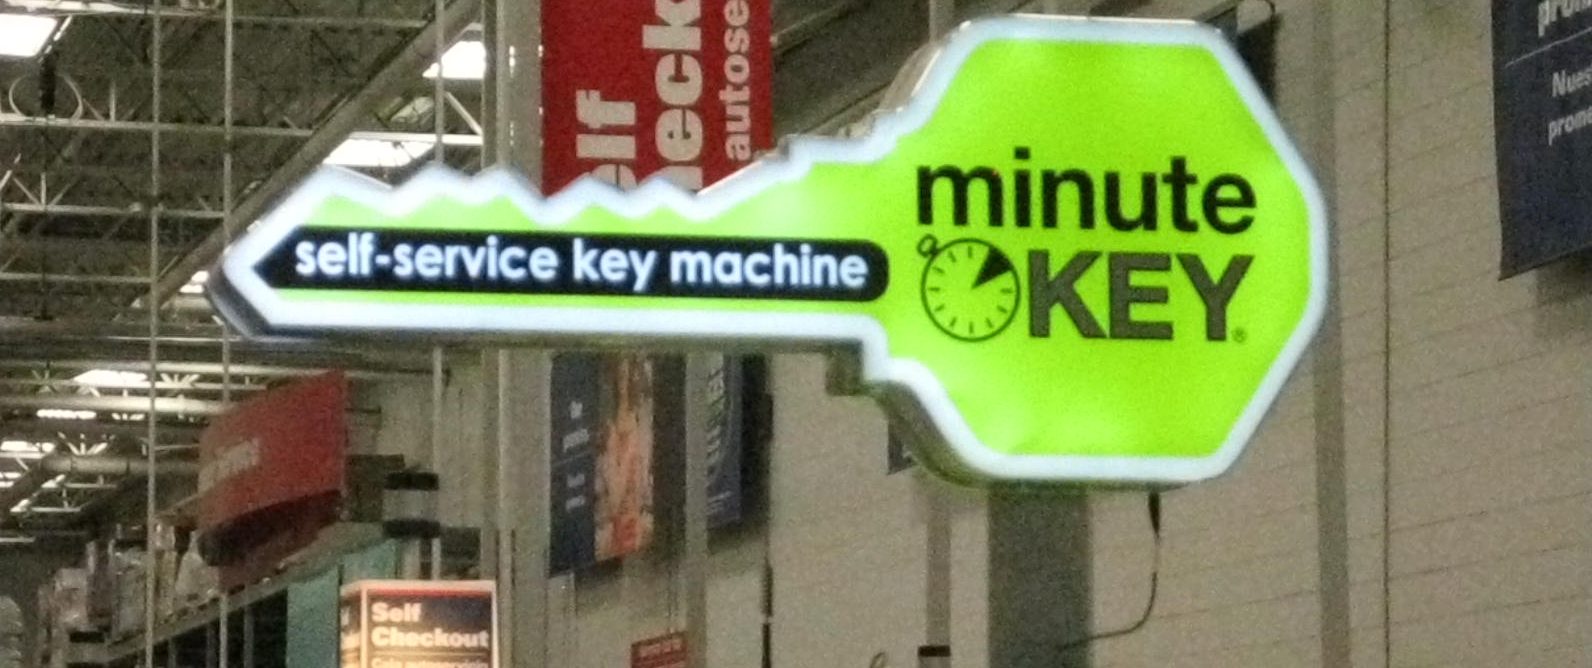 Copying a key with the minuteKey kiosk at Walmart 